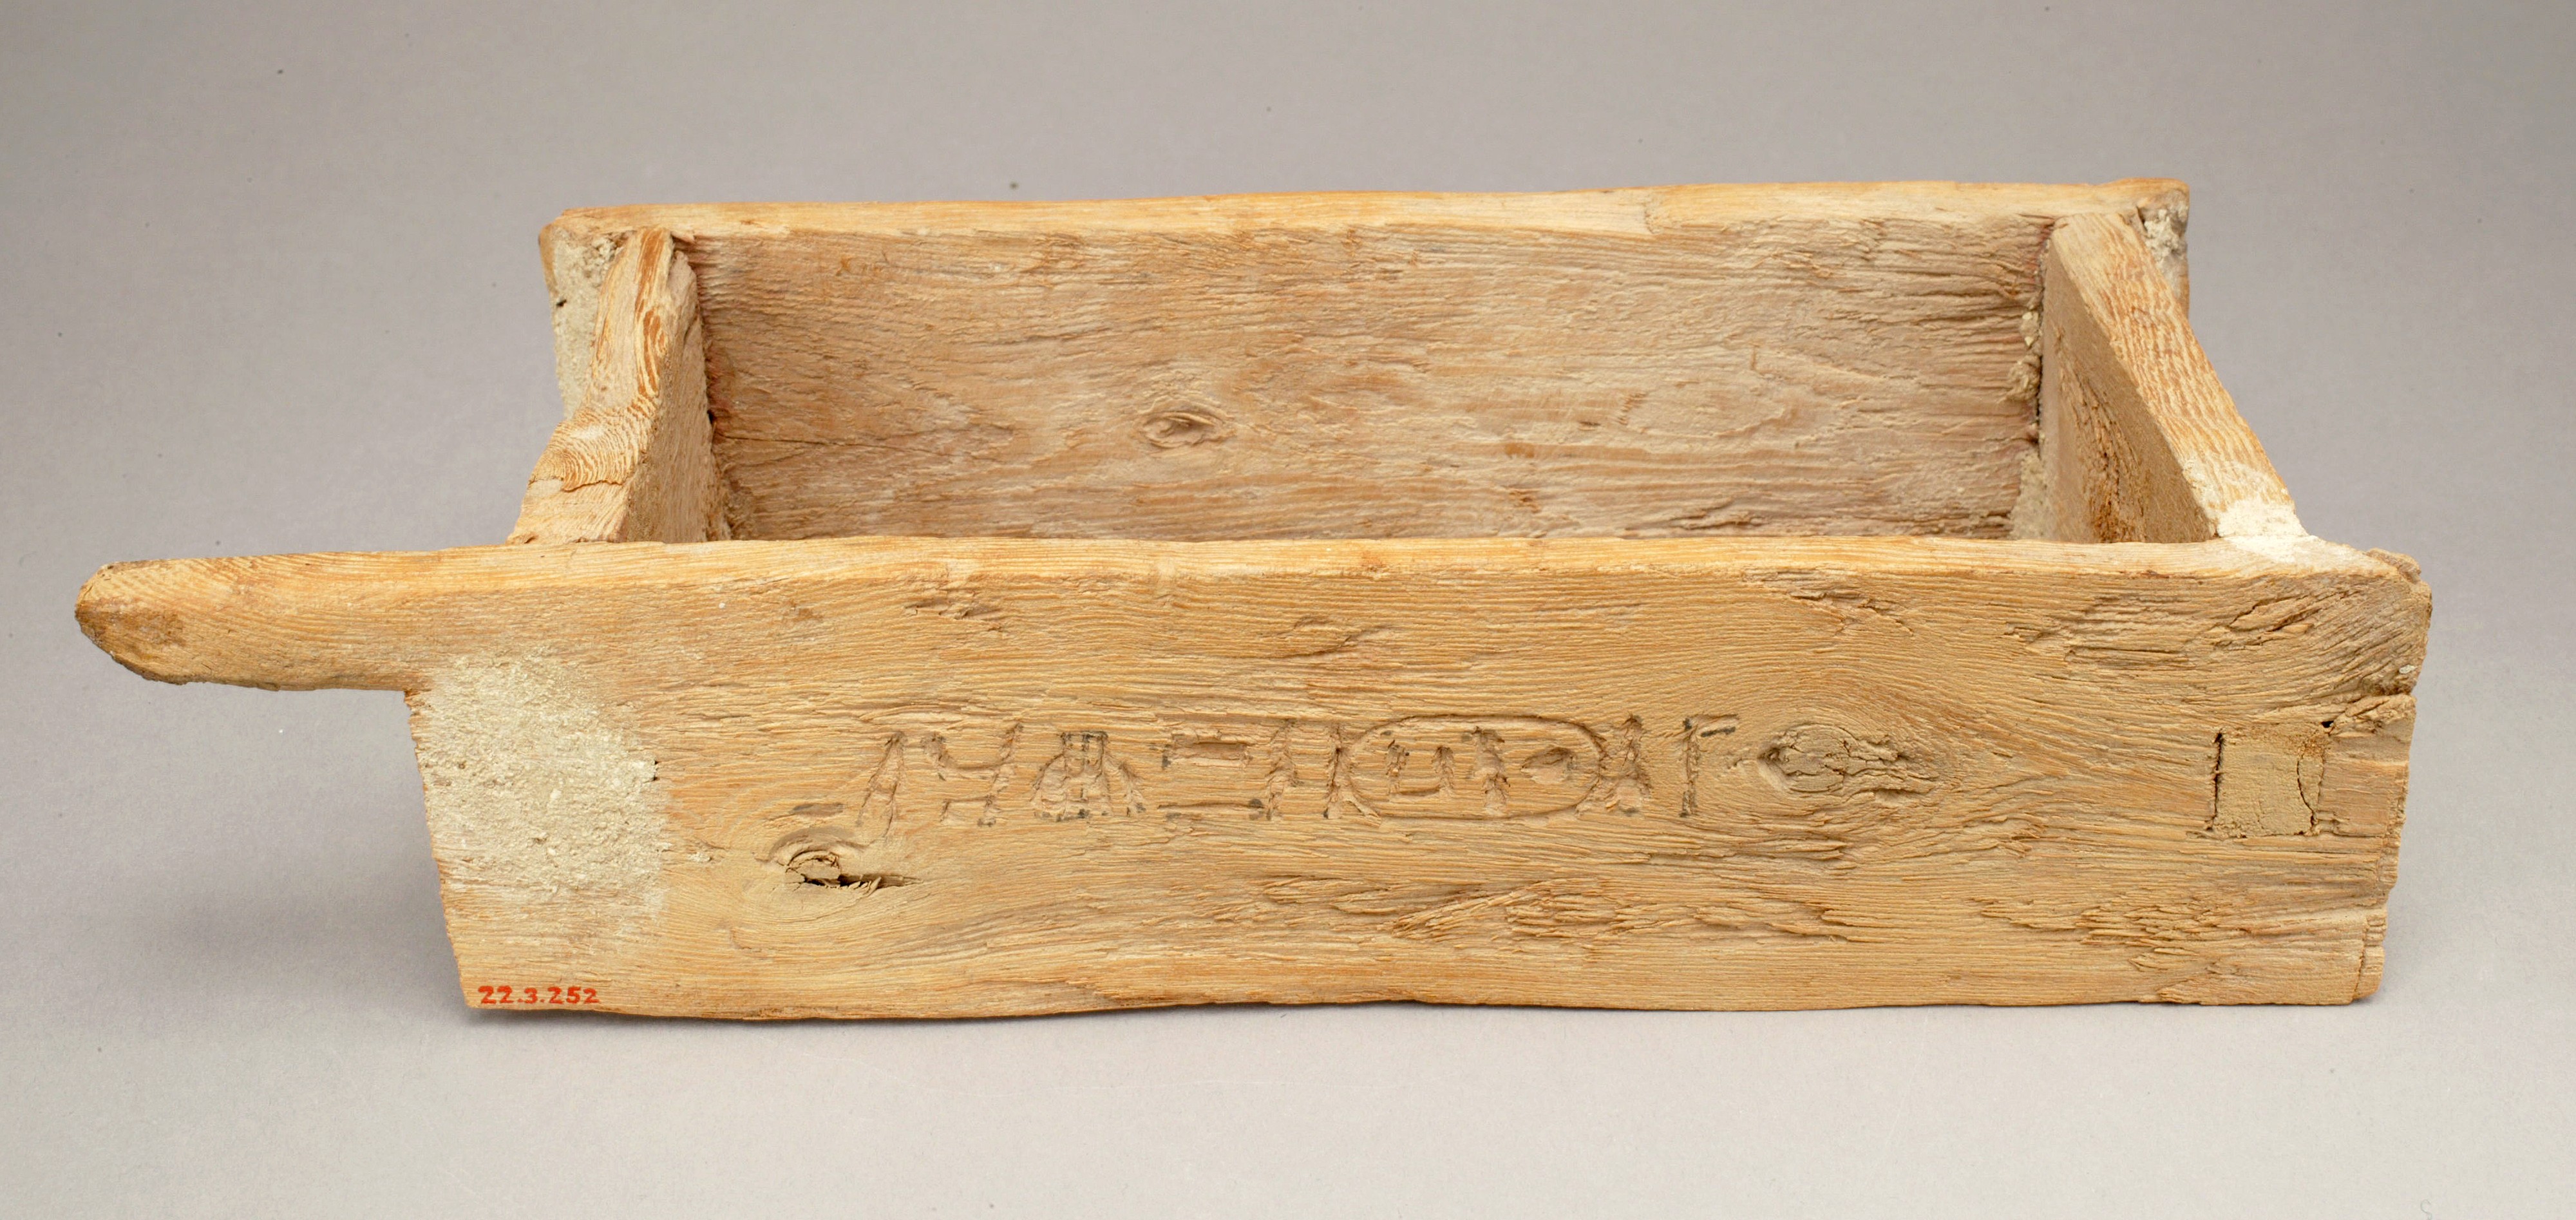 Brick Mold from a Foundation Deposit for Hatshepsut's Temple, New Kingdom